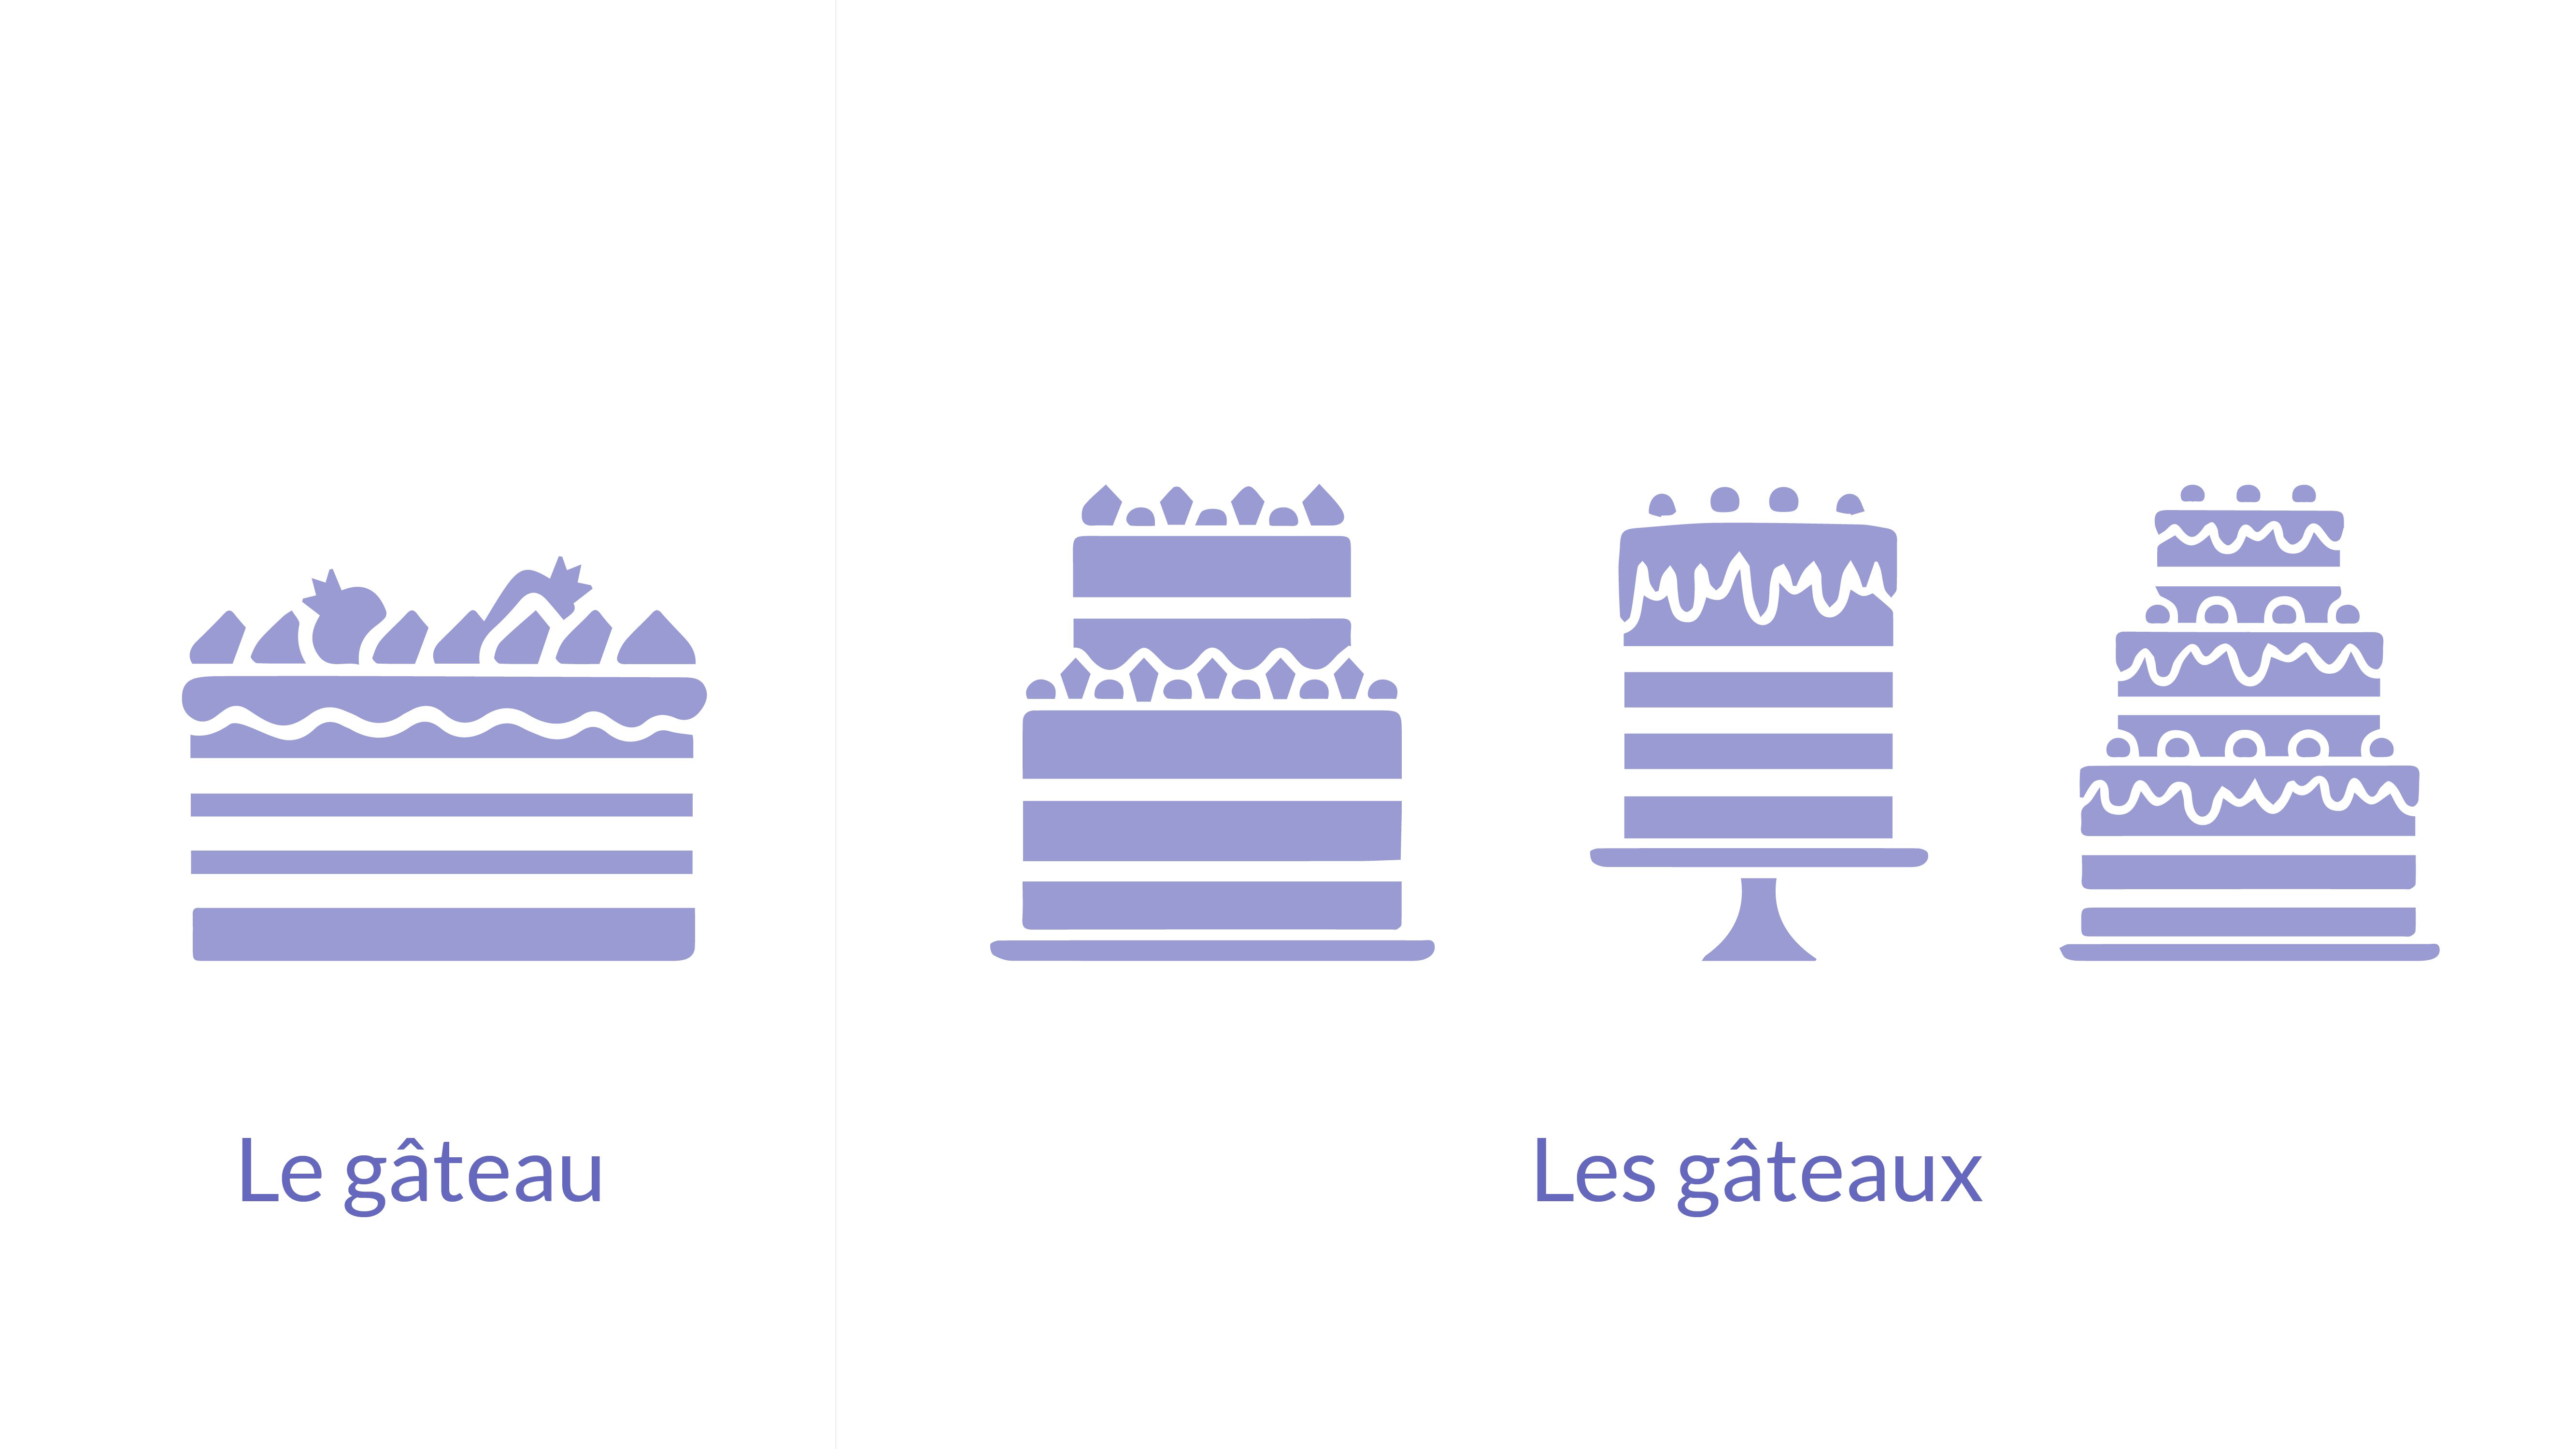 A collage of 2 pictures: 1) a cake with “le gâteau” written under it; 2) several different cakes with “les gâteaux” written underneath.